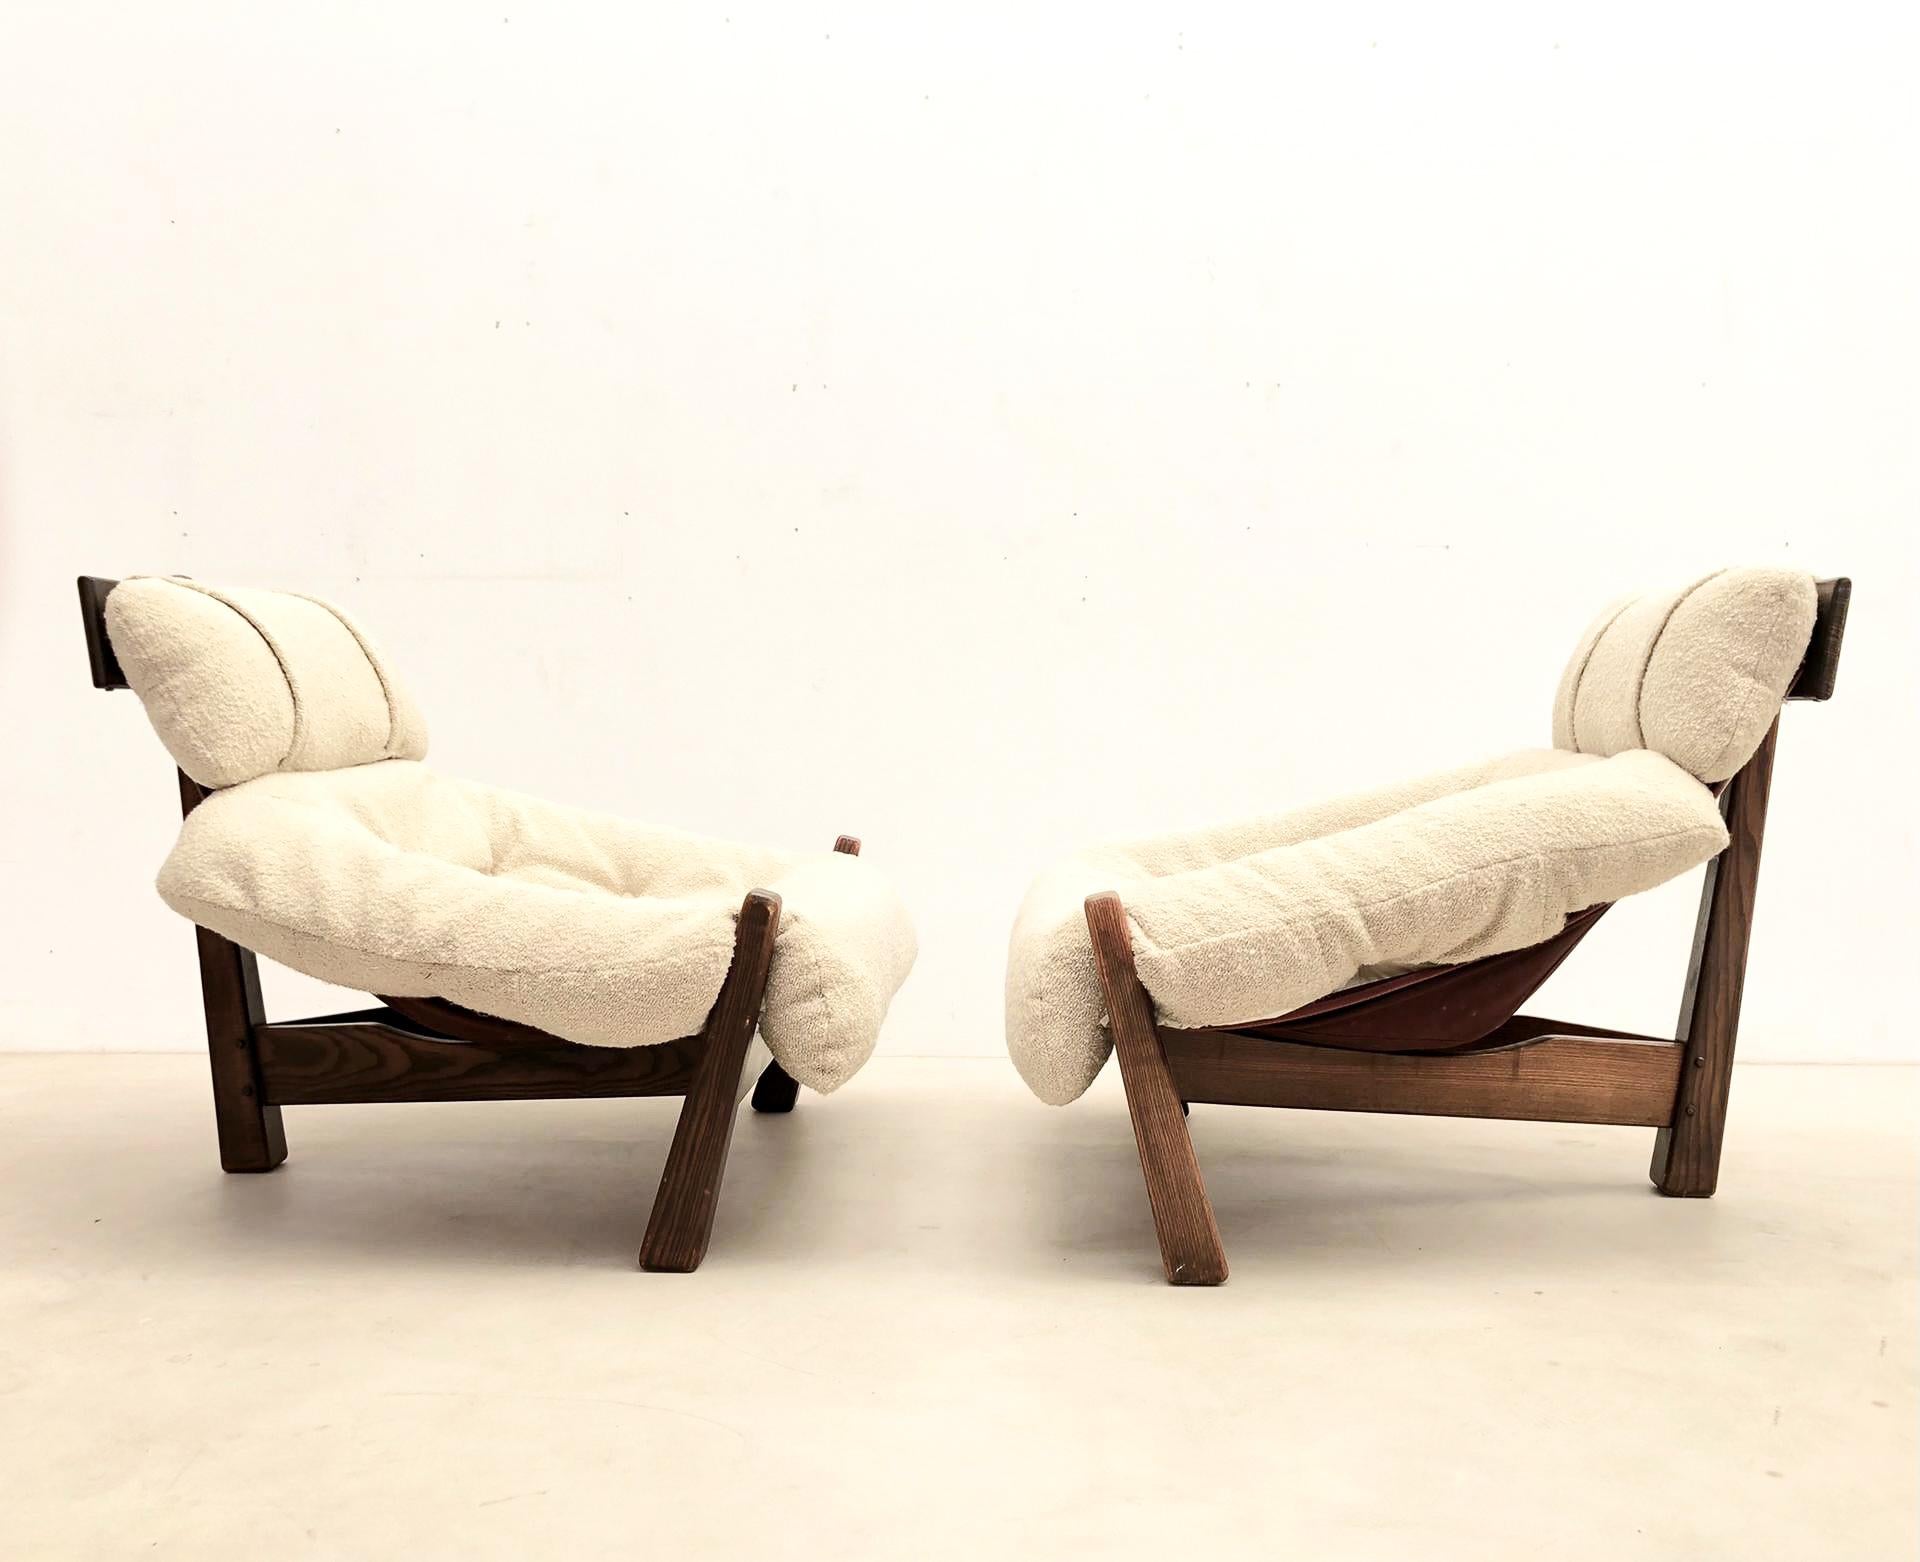 Late 20th Century Tripod Lounge Chair by Gerard van den Berg for Montis, the Netherlands, 1970s